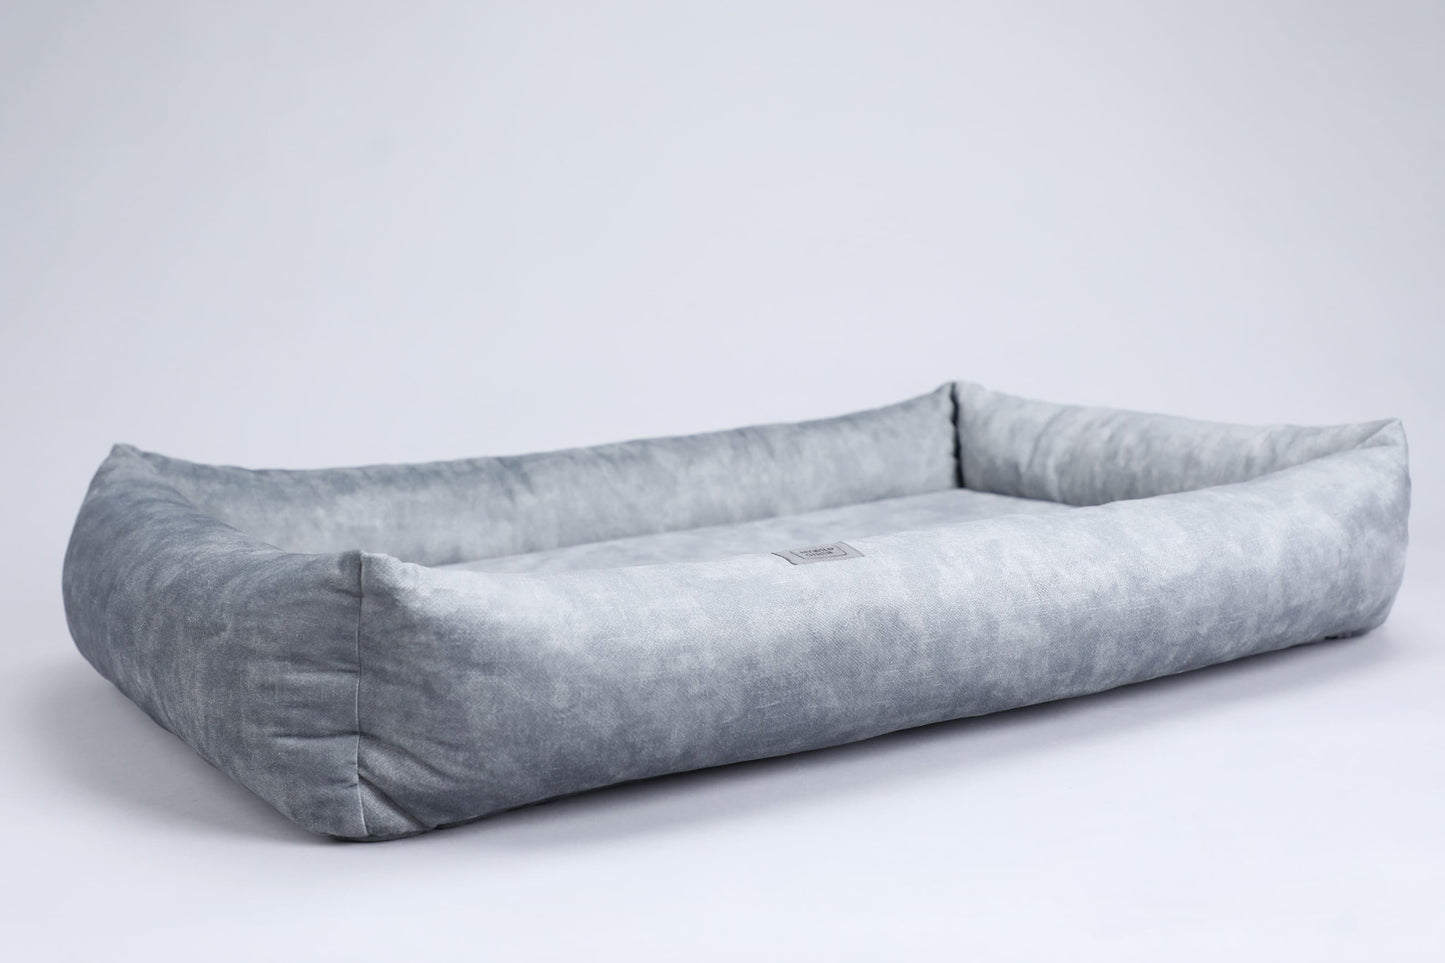 2-sided classic dog bed. METAL GREY - European handmade dog accessories by My Wild Other